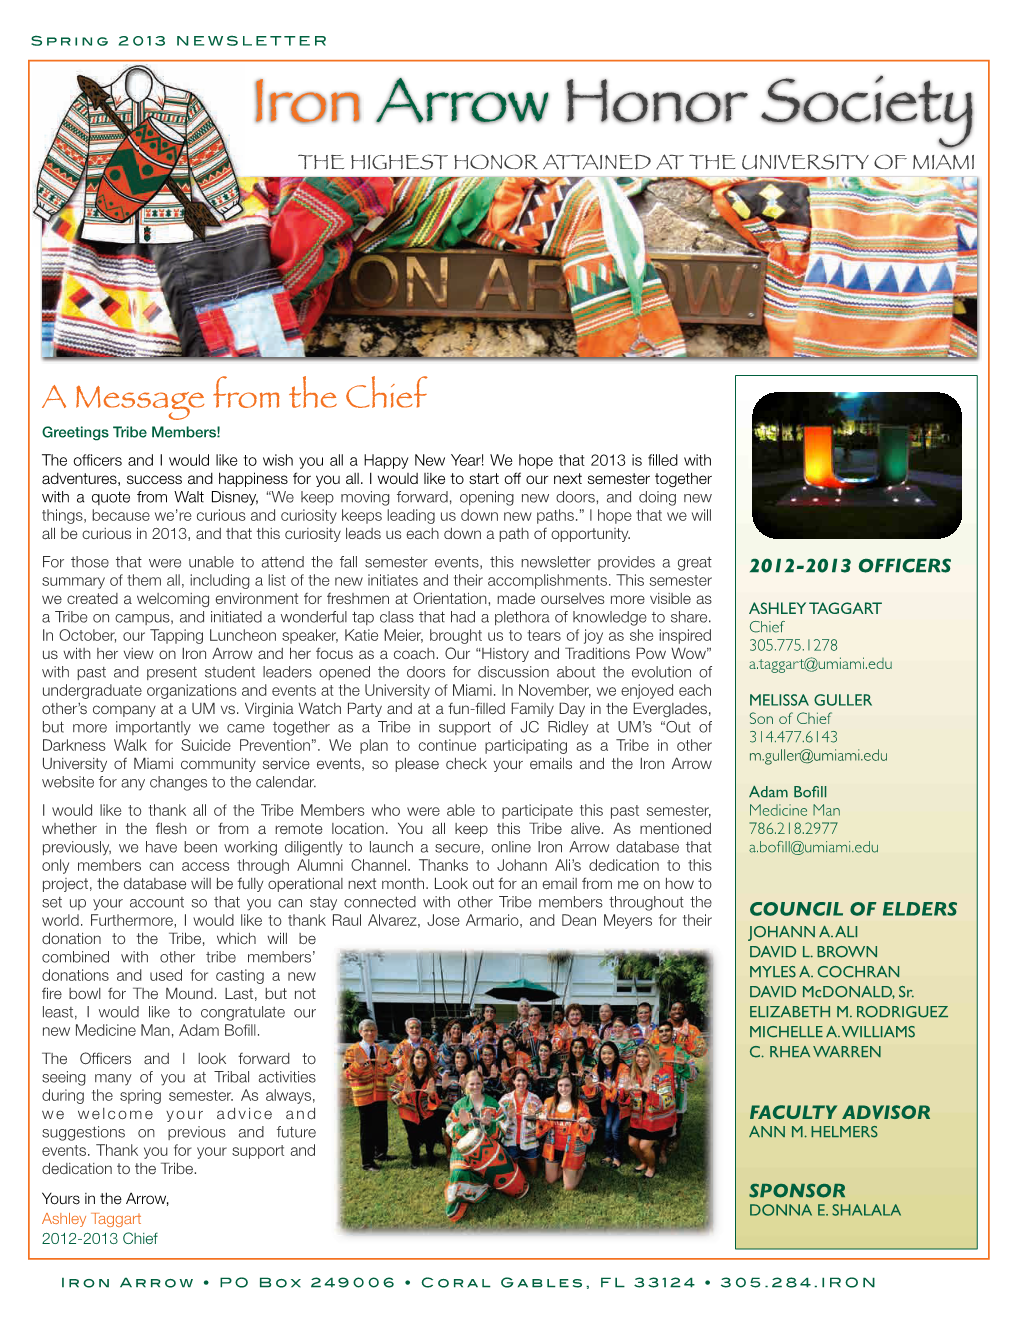 Spring 2013 NEWSLETTER Iron Arrow Honor Society the HIGHEST HONOR ATTAINED at the UNIVERSITY of MIAMI